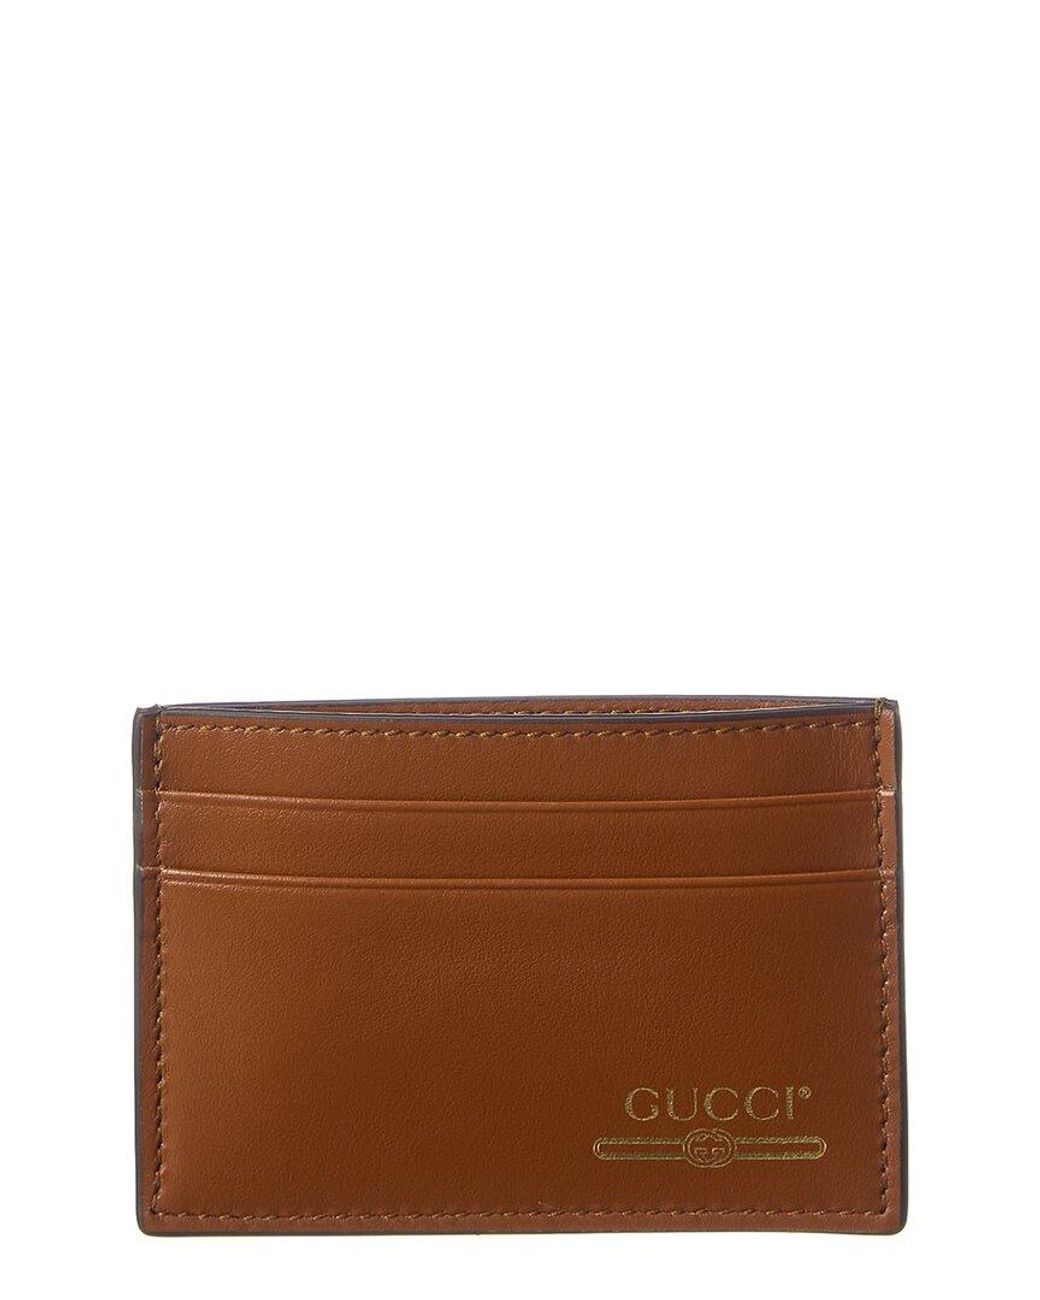 Gucci Money Clip Leather Card Holder in Brown for Men | Lyst